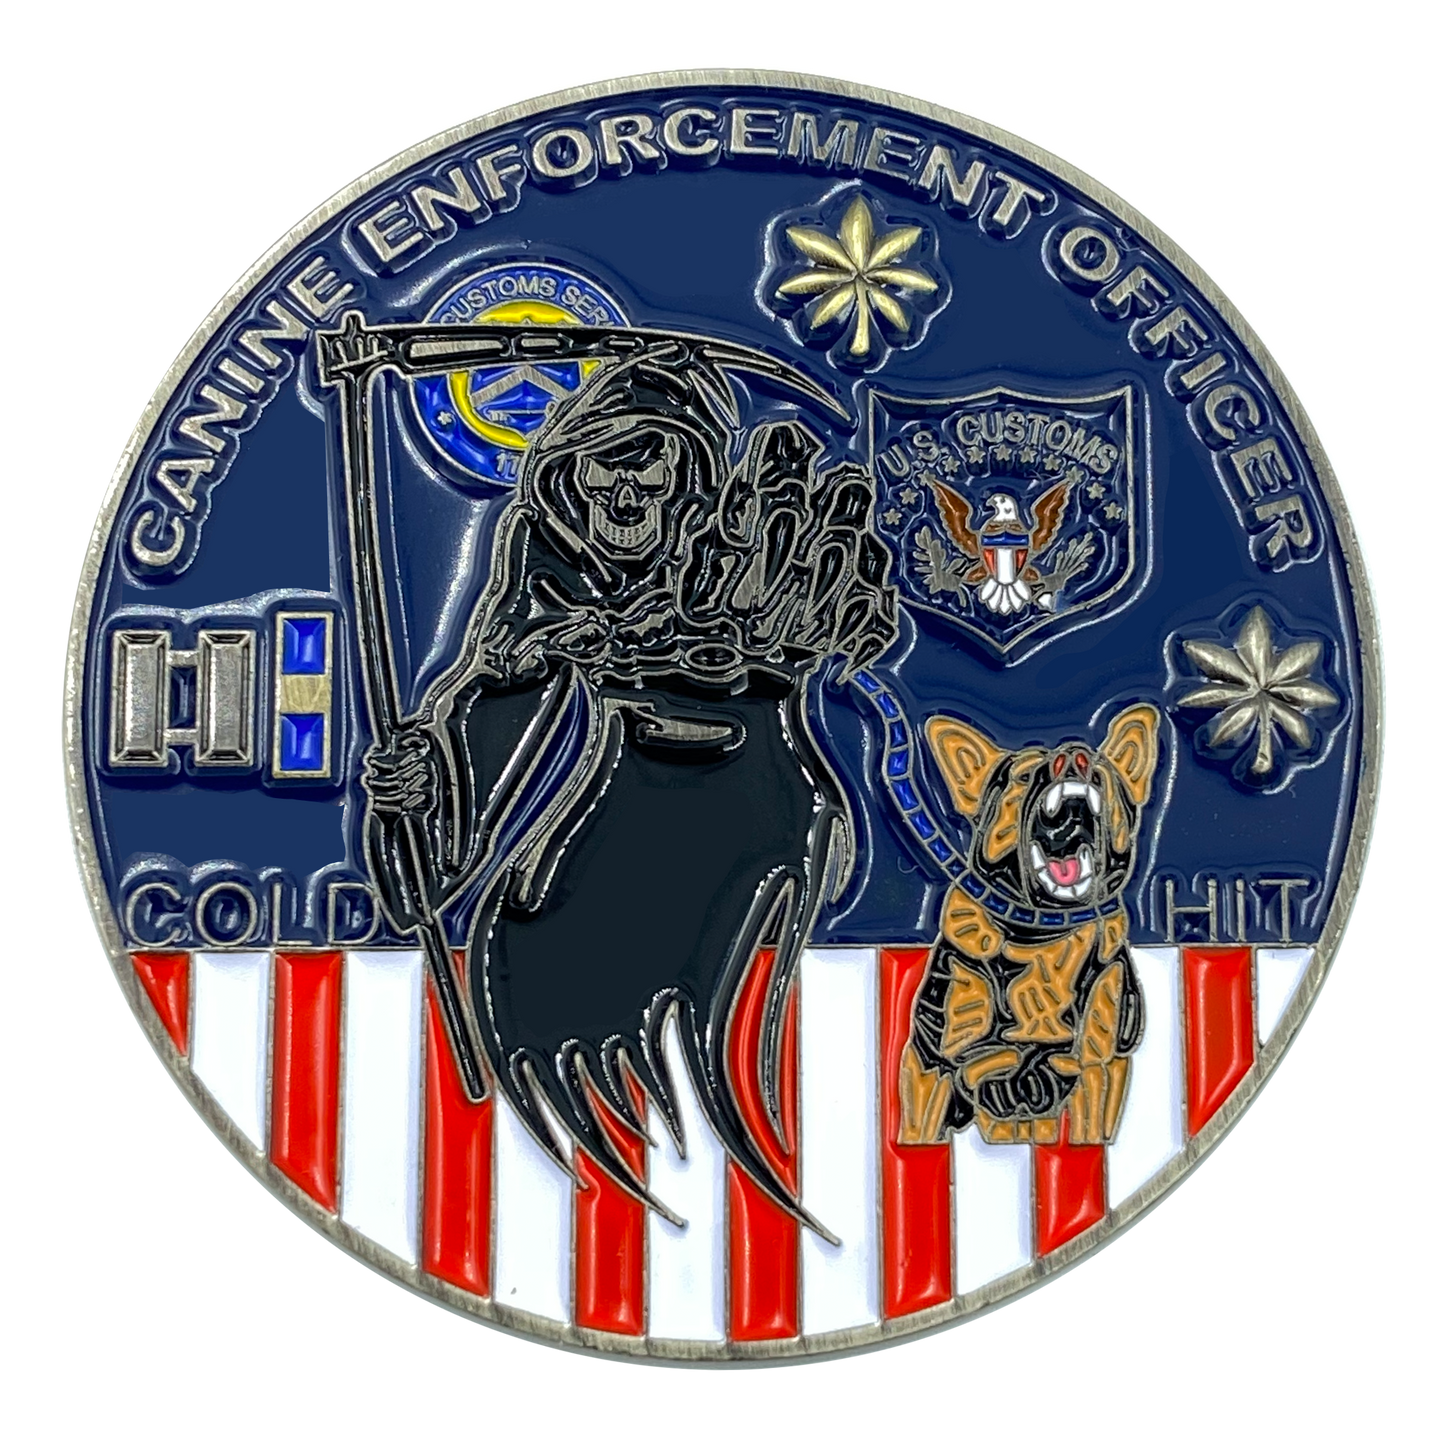 BB-010 Legacy US Customs Service Canine Enforcement Officer Treasury Department Inspector K9 Challenge Coin